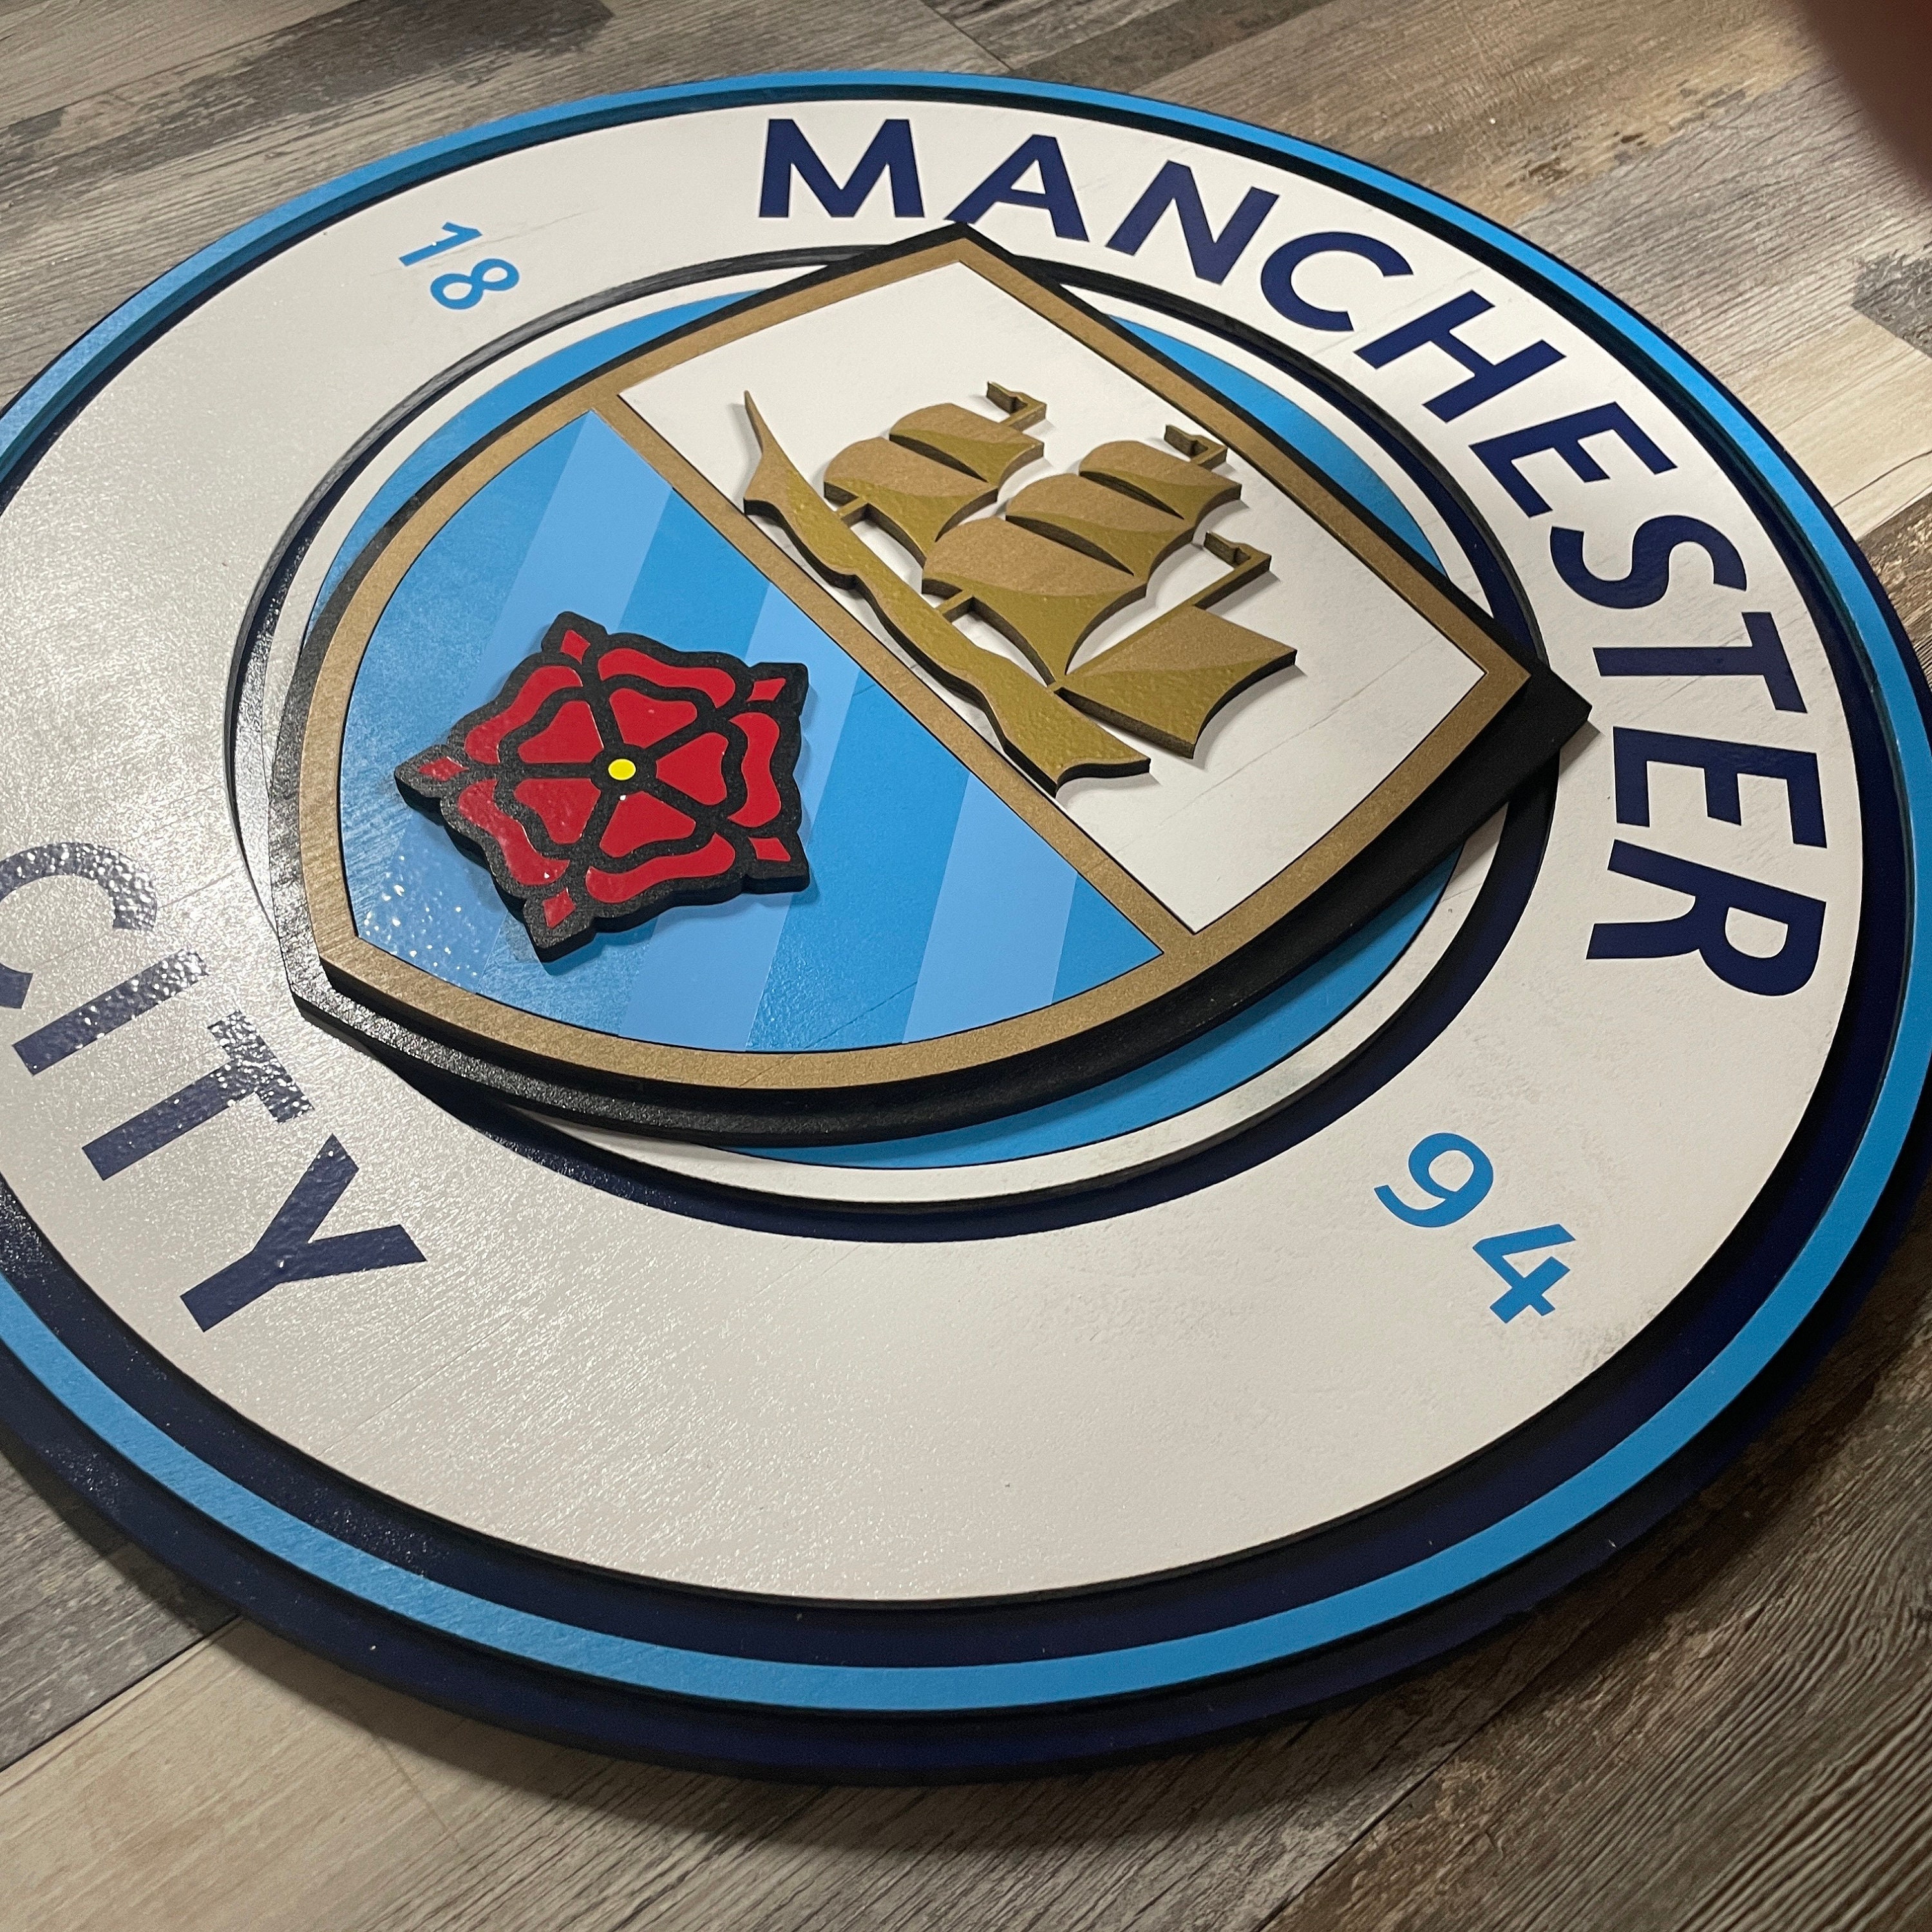 Male Hand Holds Badge Emblem Manchester City Football Club Blue